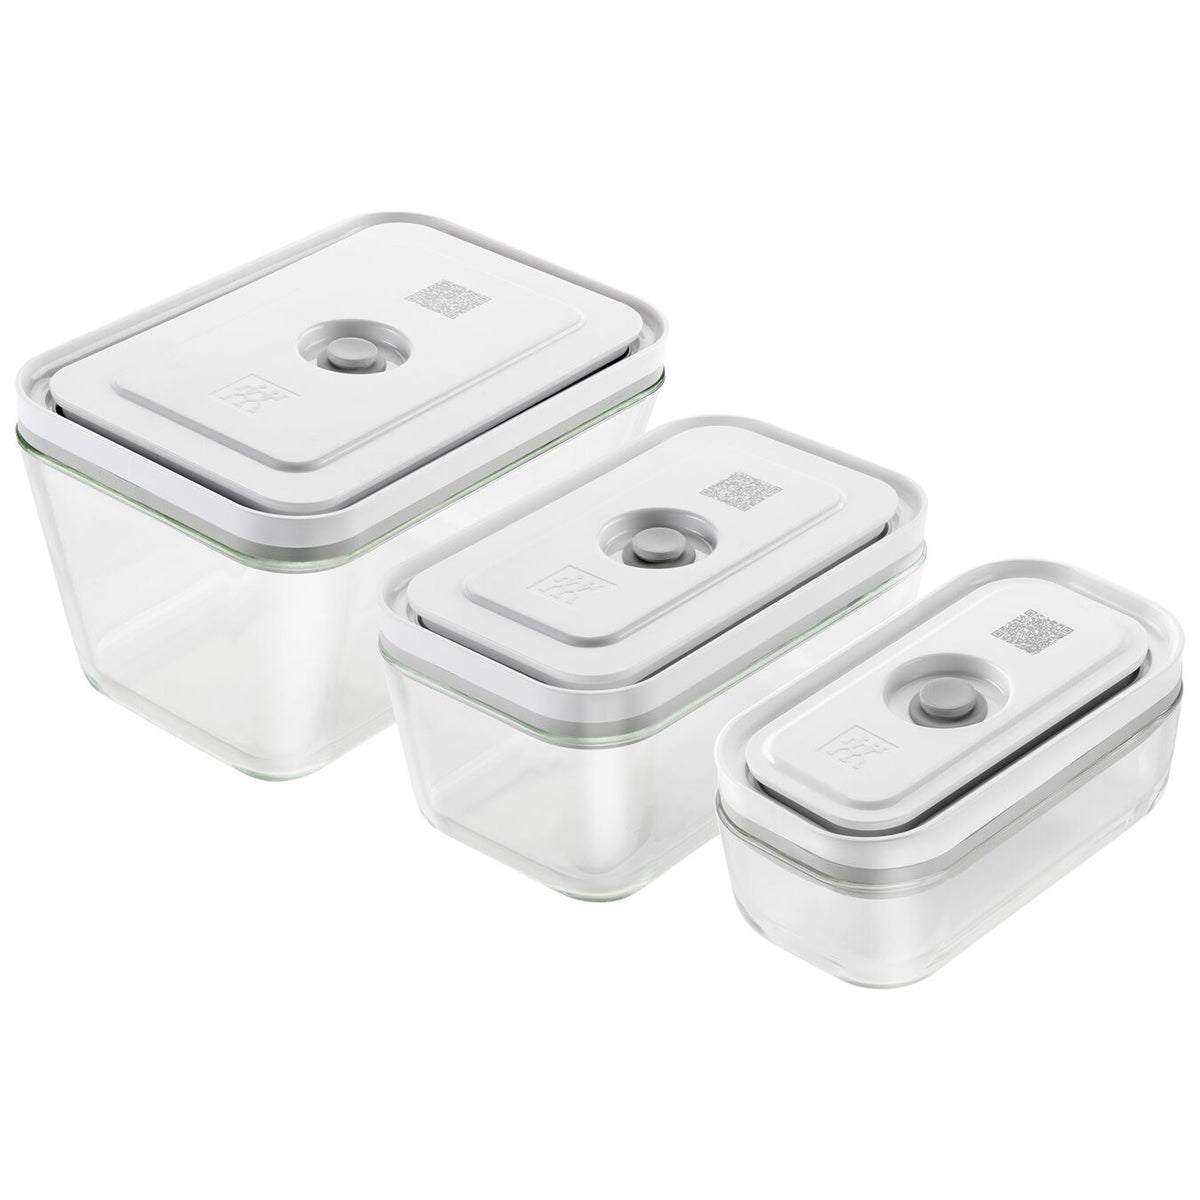 ZWILLING Fresh & Save Glass Vacuum Containers, Set of 3